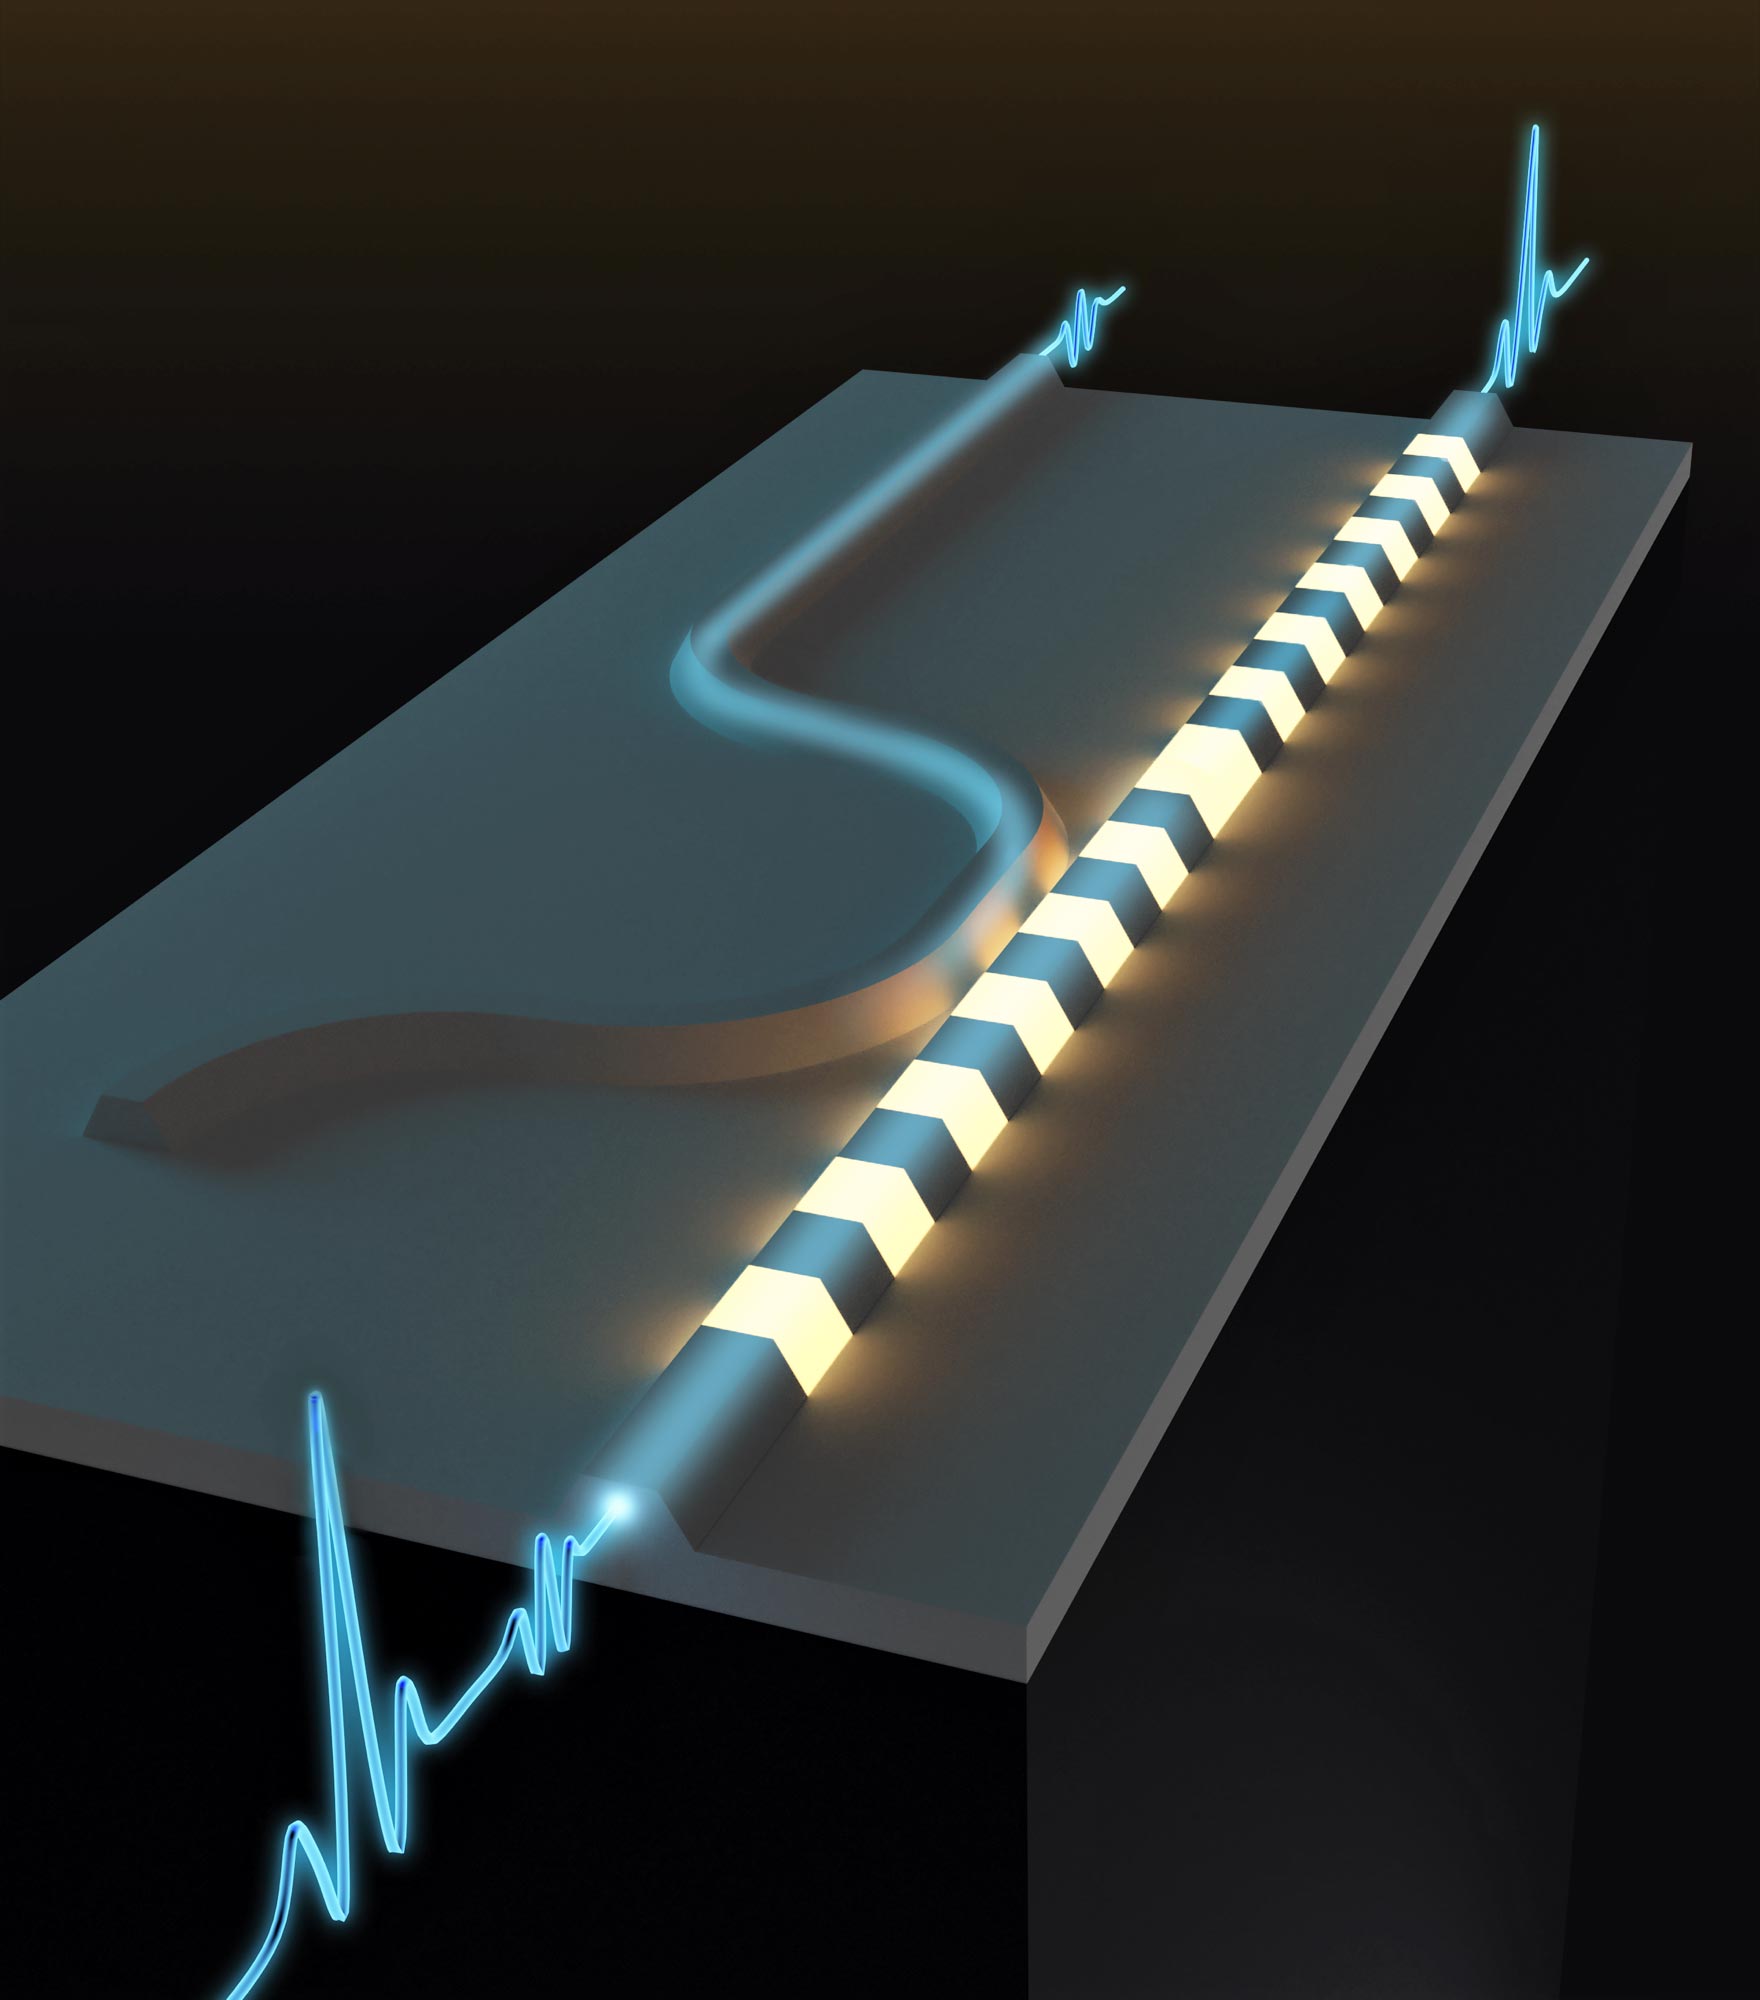 Caltech’s New Optical Switch Could Lead to Ultrafast Signal Processing